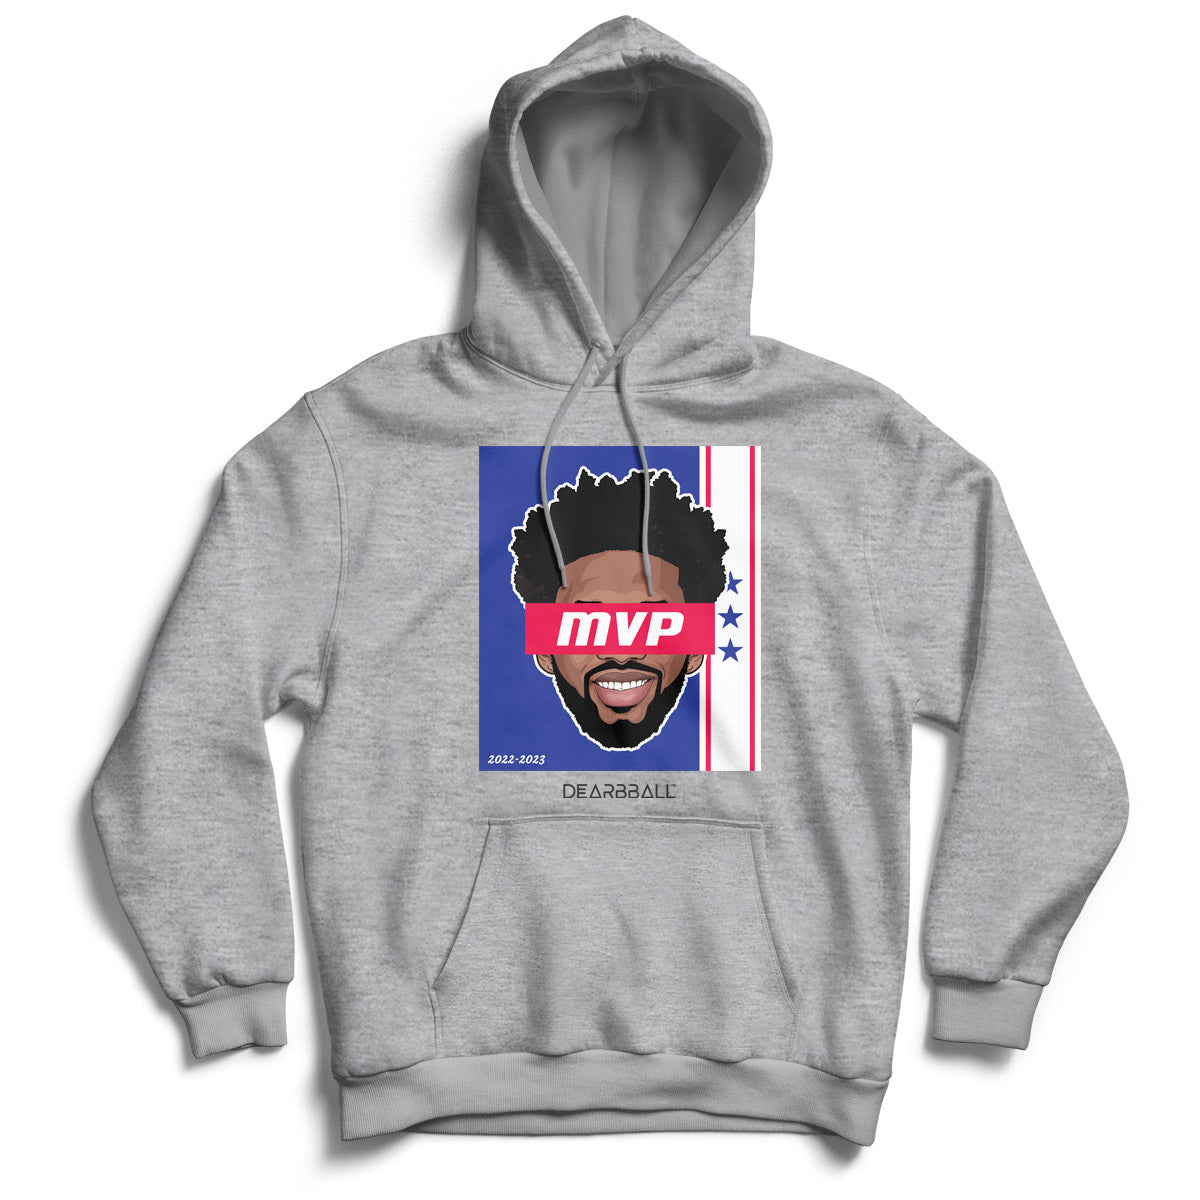 Sweat-a-capuche-Joel-Embiid-Sixers-Philadelphie-Dearbball-vetements-marque-france